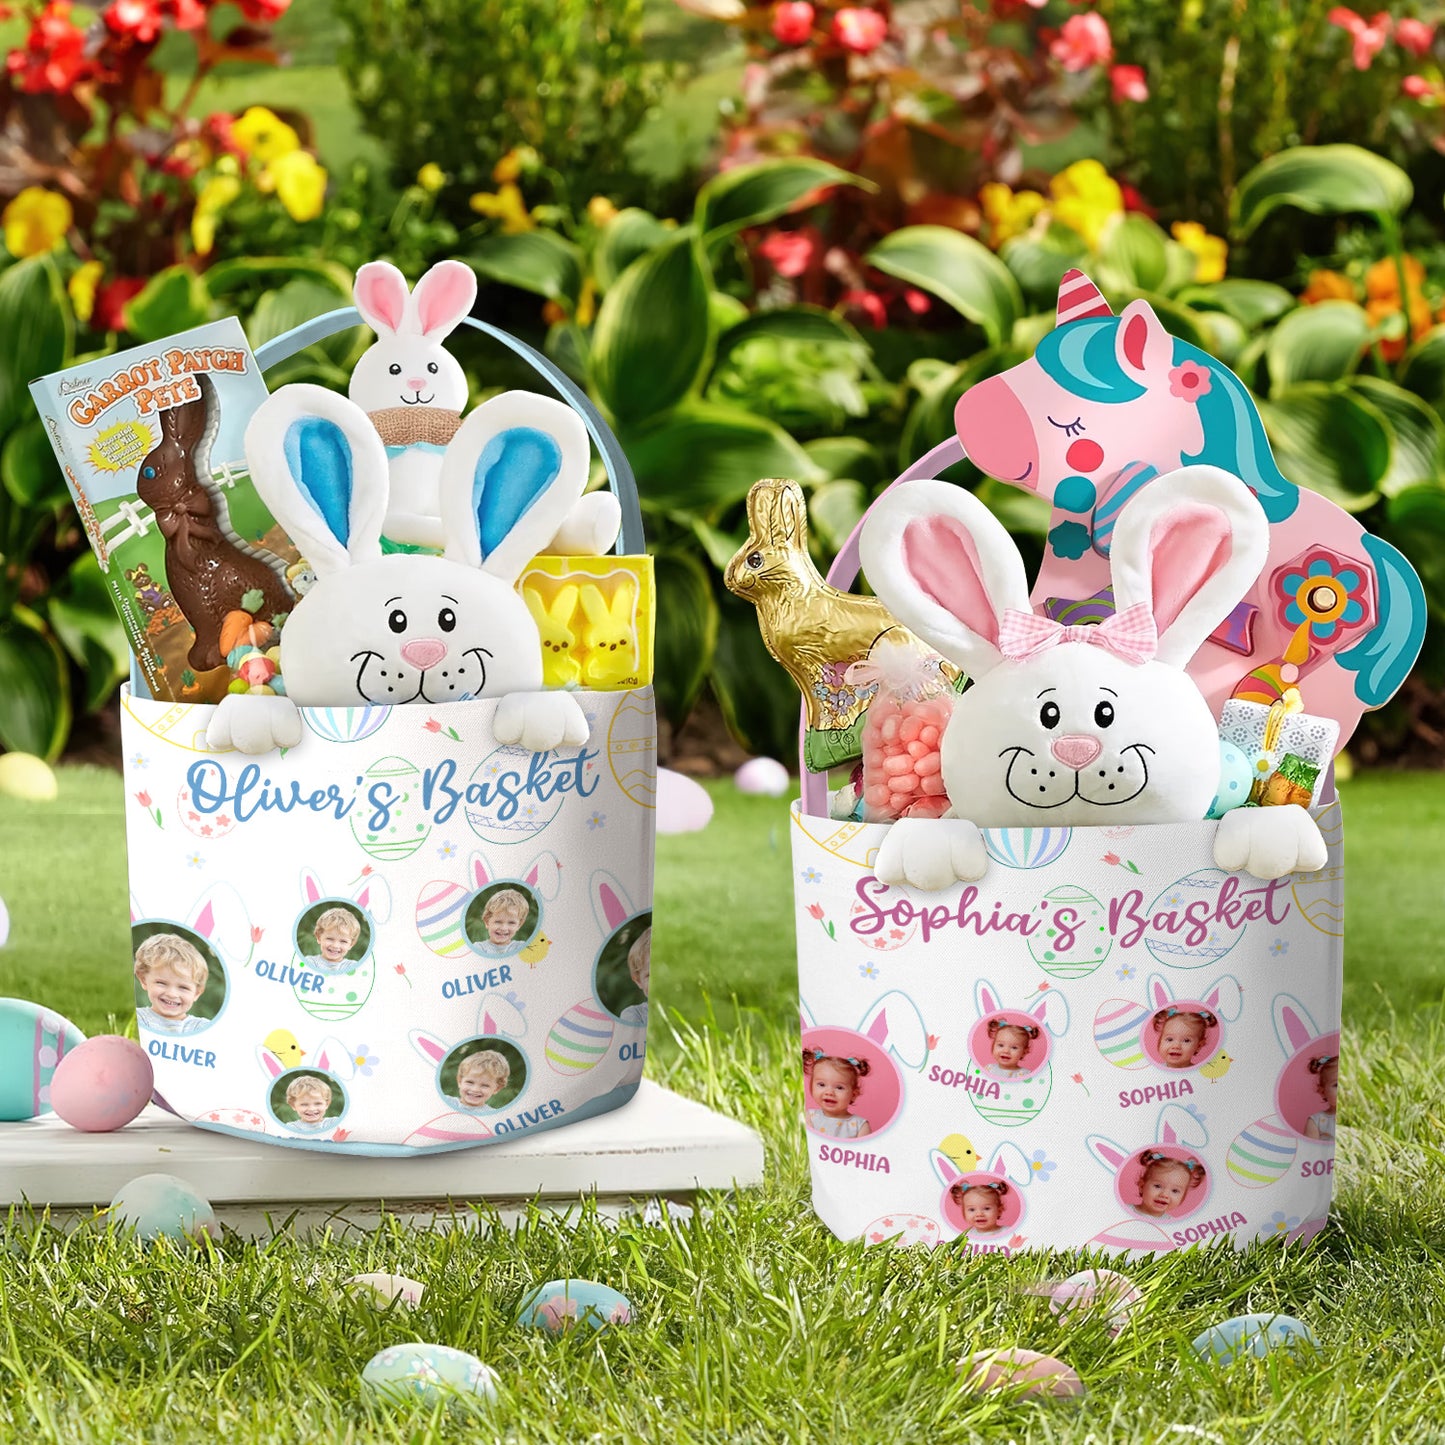 Kid Happy Easter With Bunny Ears - Personalized Photo Easter Basket